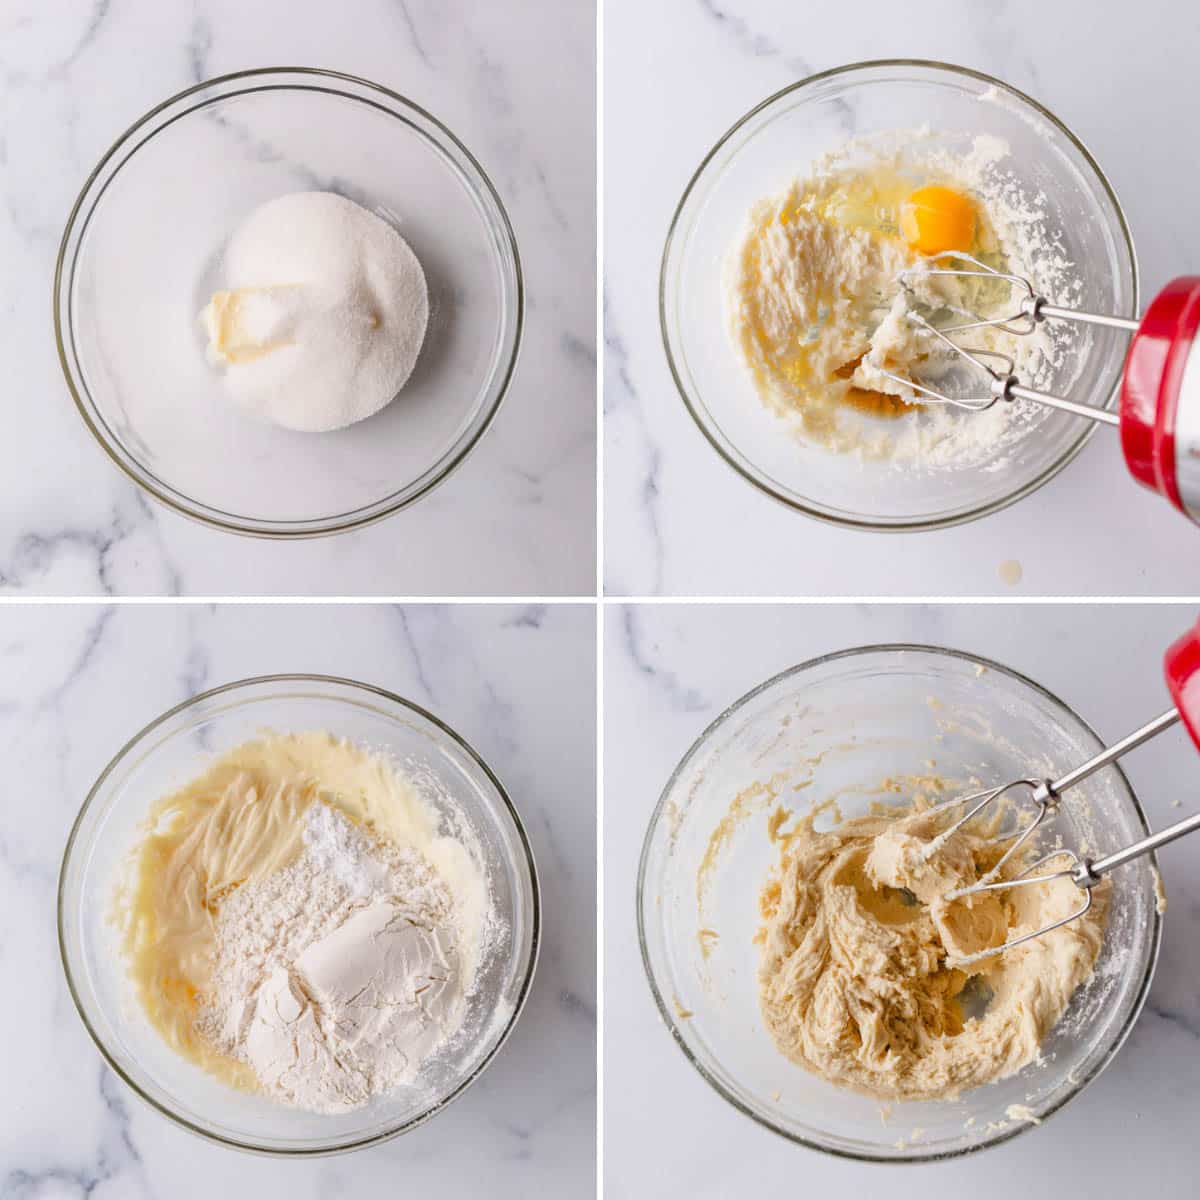 Four images showing the process of creaming ingredients for crust.